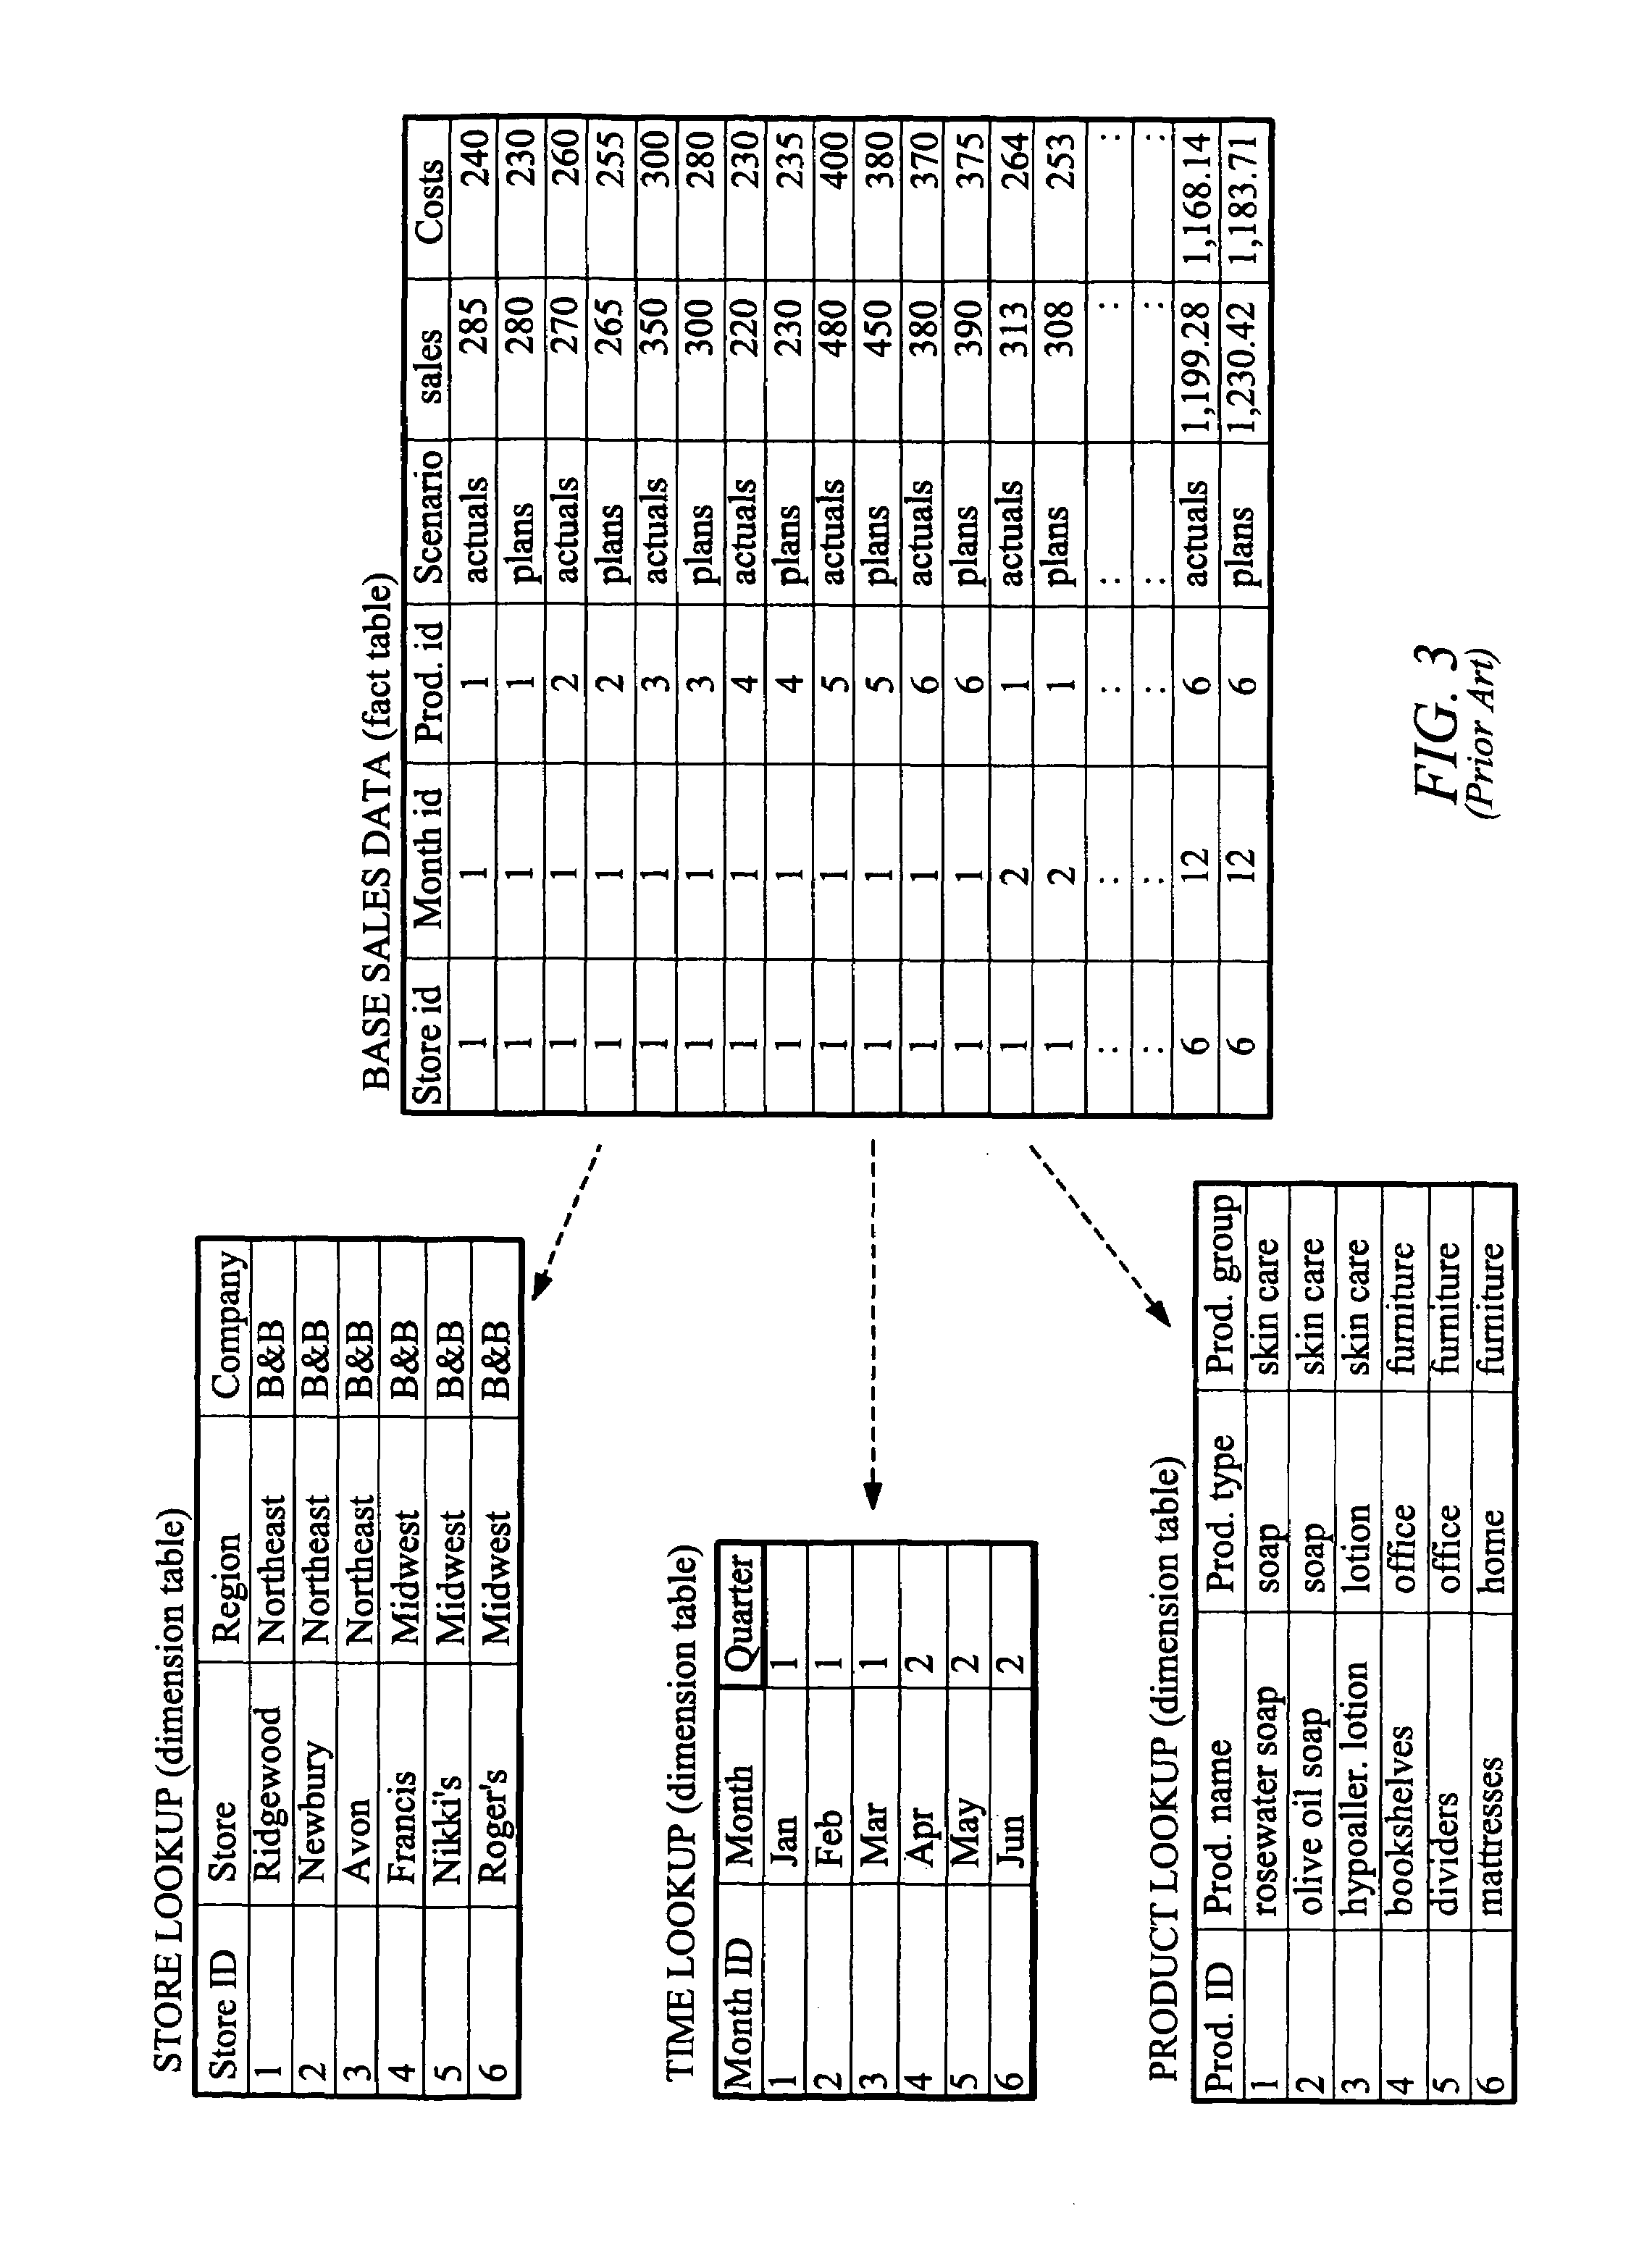 Computer systems and methods for the query and visualization of multidimensional databases